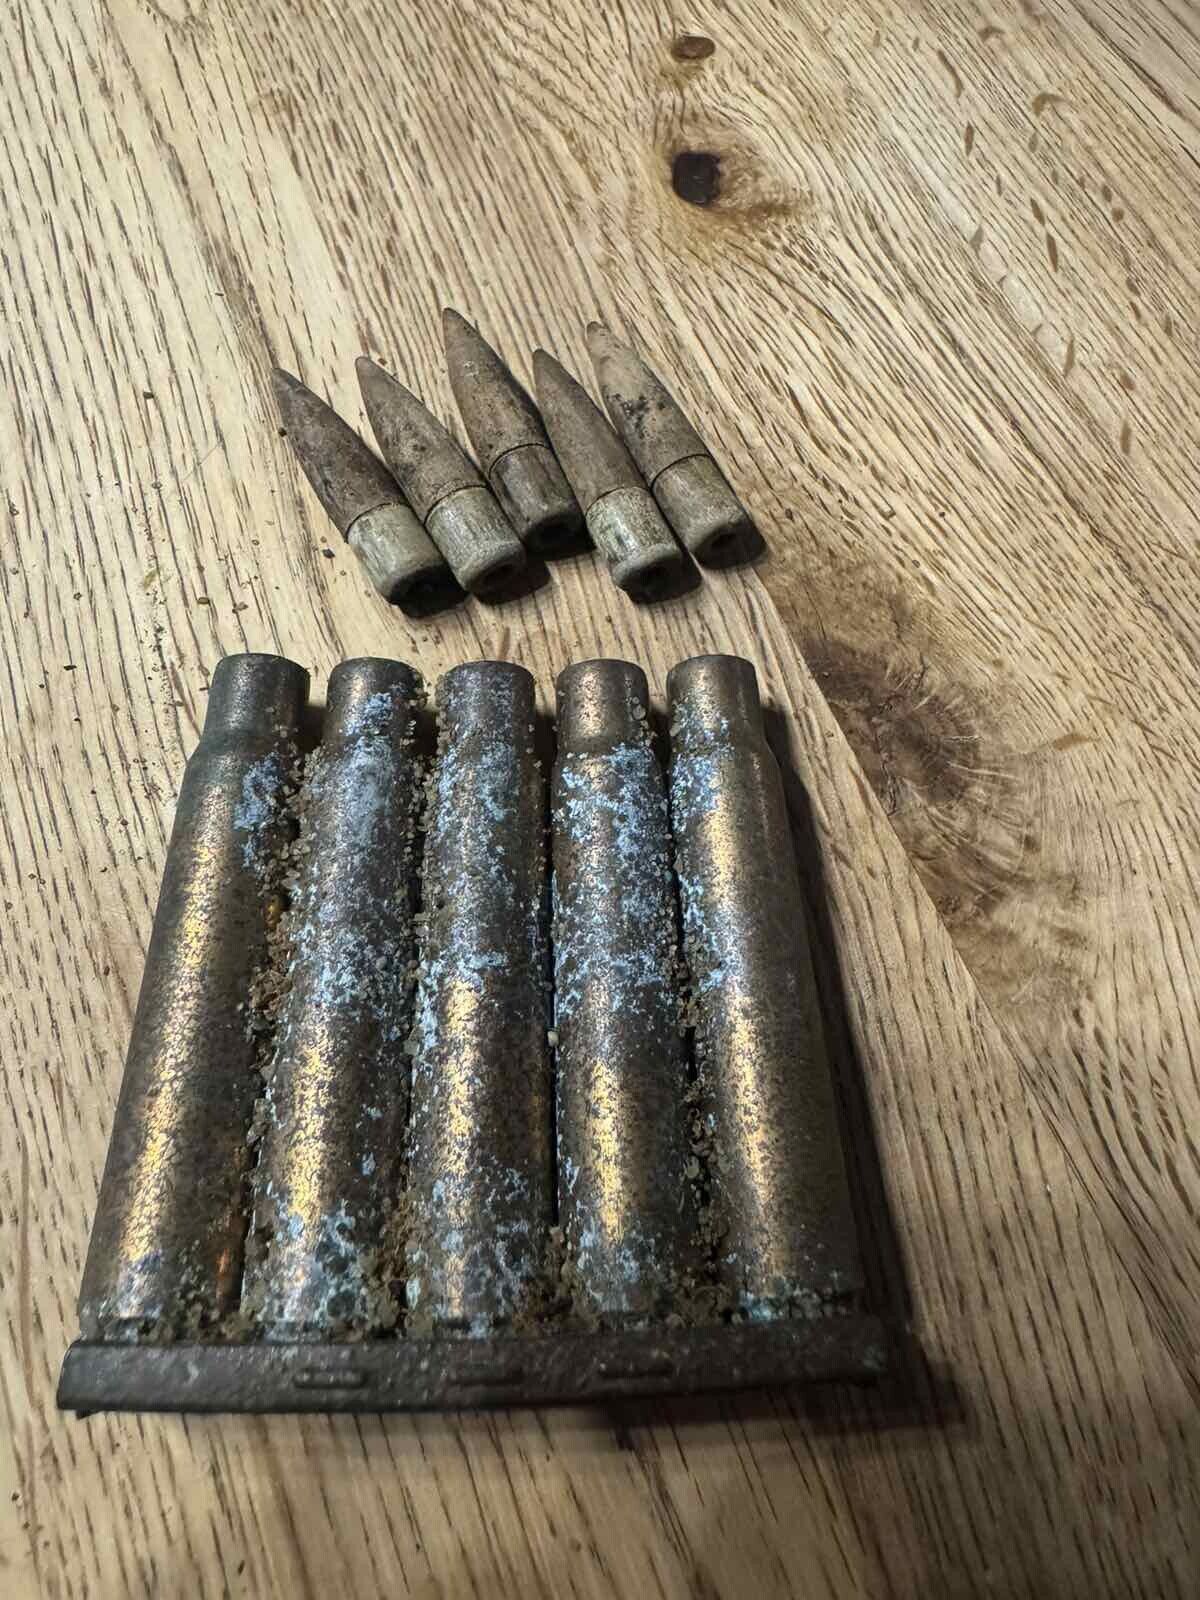 Very rare p platz patrone for k98 with wooden  bullet ww2